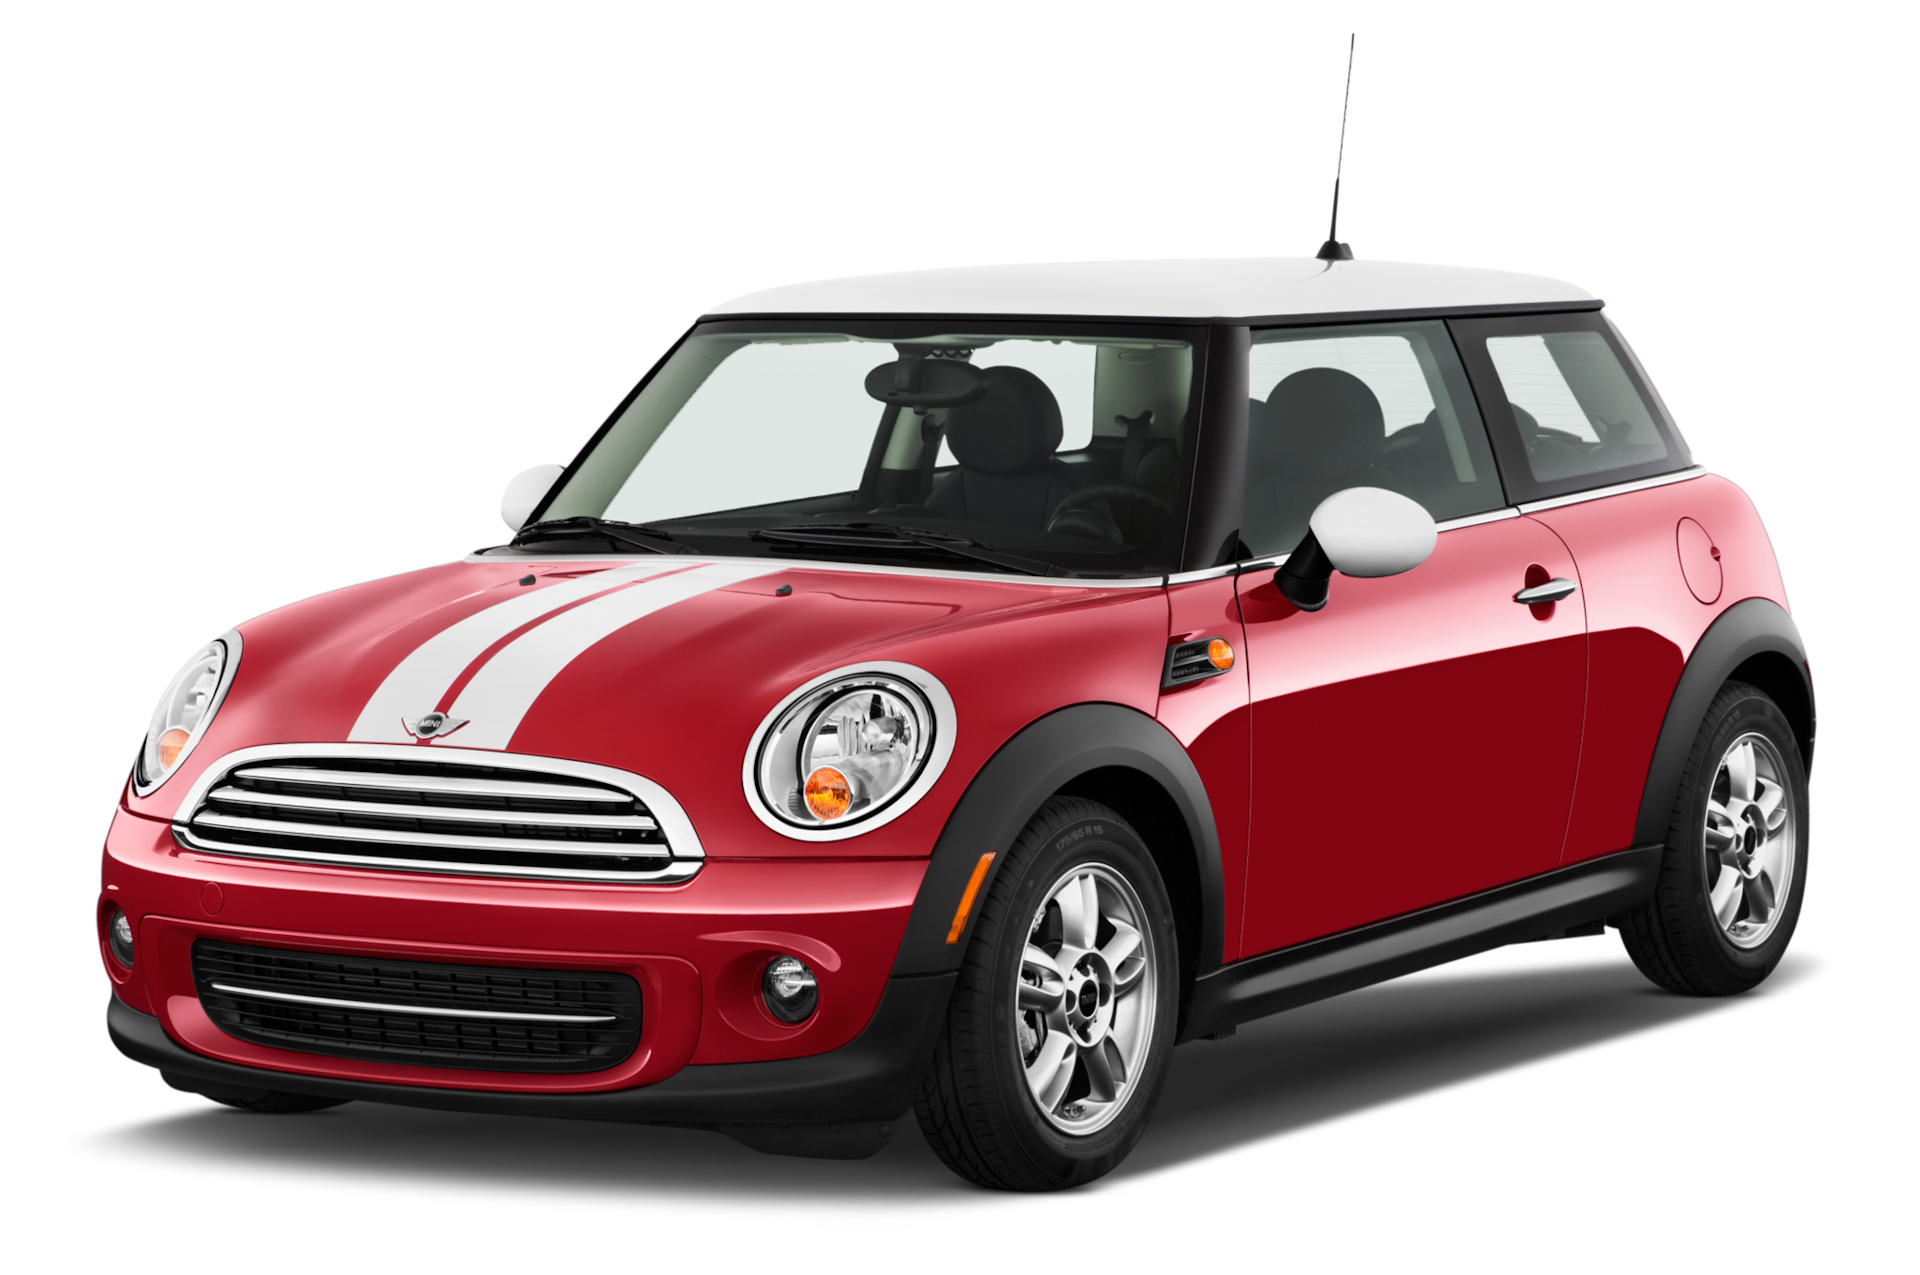 2013 MINI Cooper Prices, Reviews, and Photos - MotorTrend